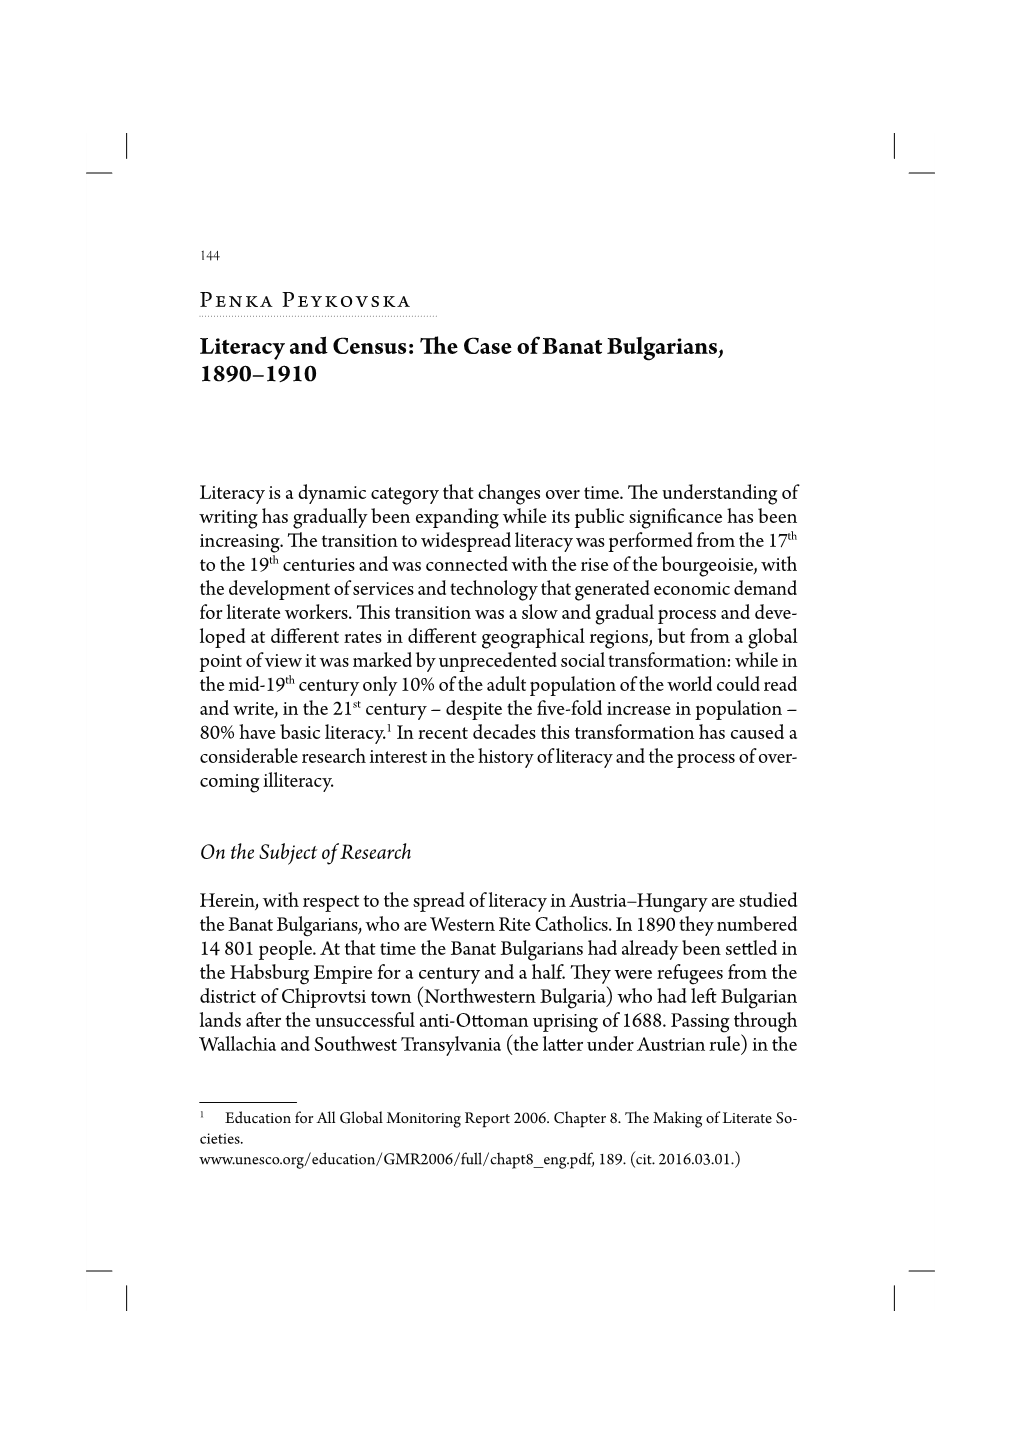 Literacy and Census: E Case of Banat Bulgarians, 1890–1910